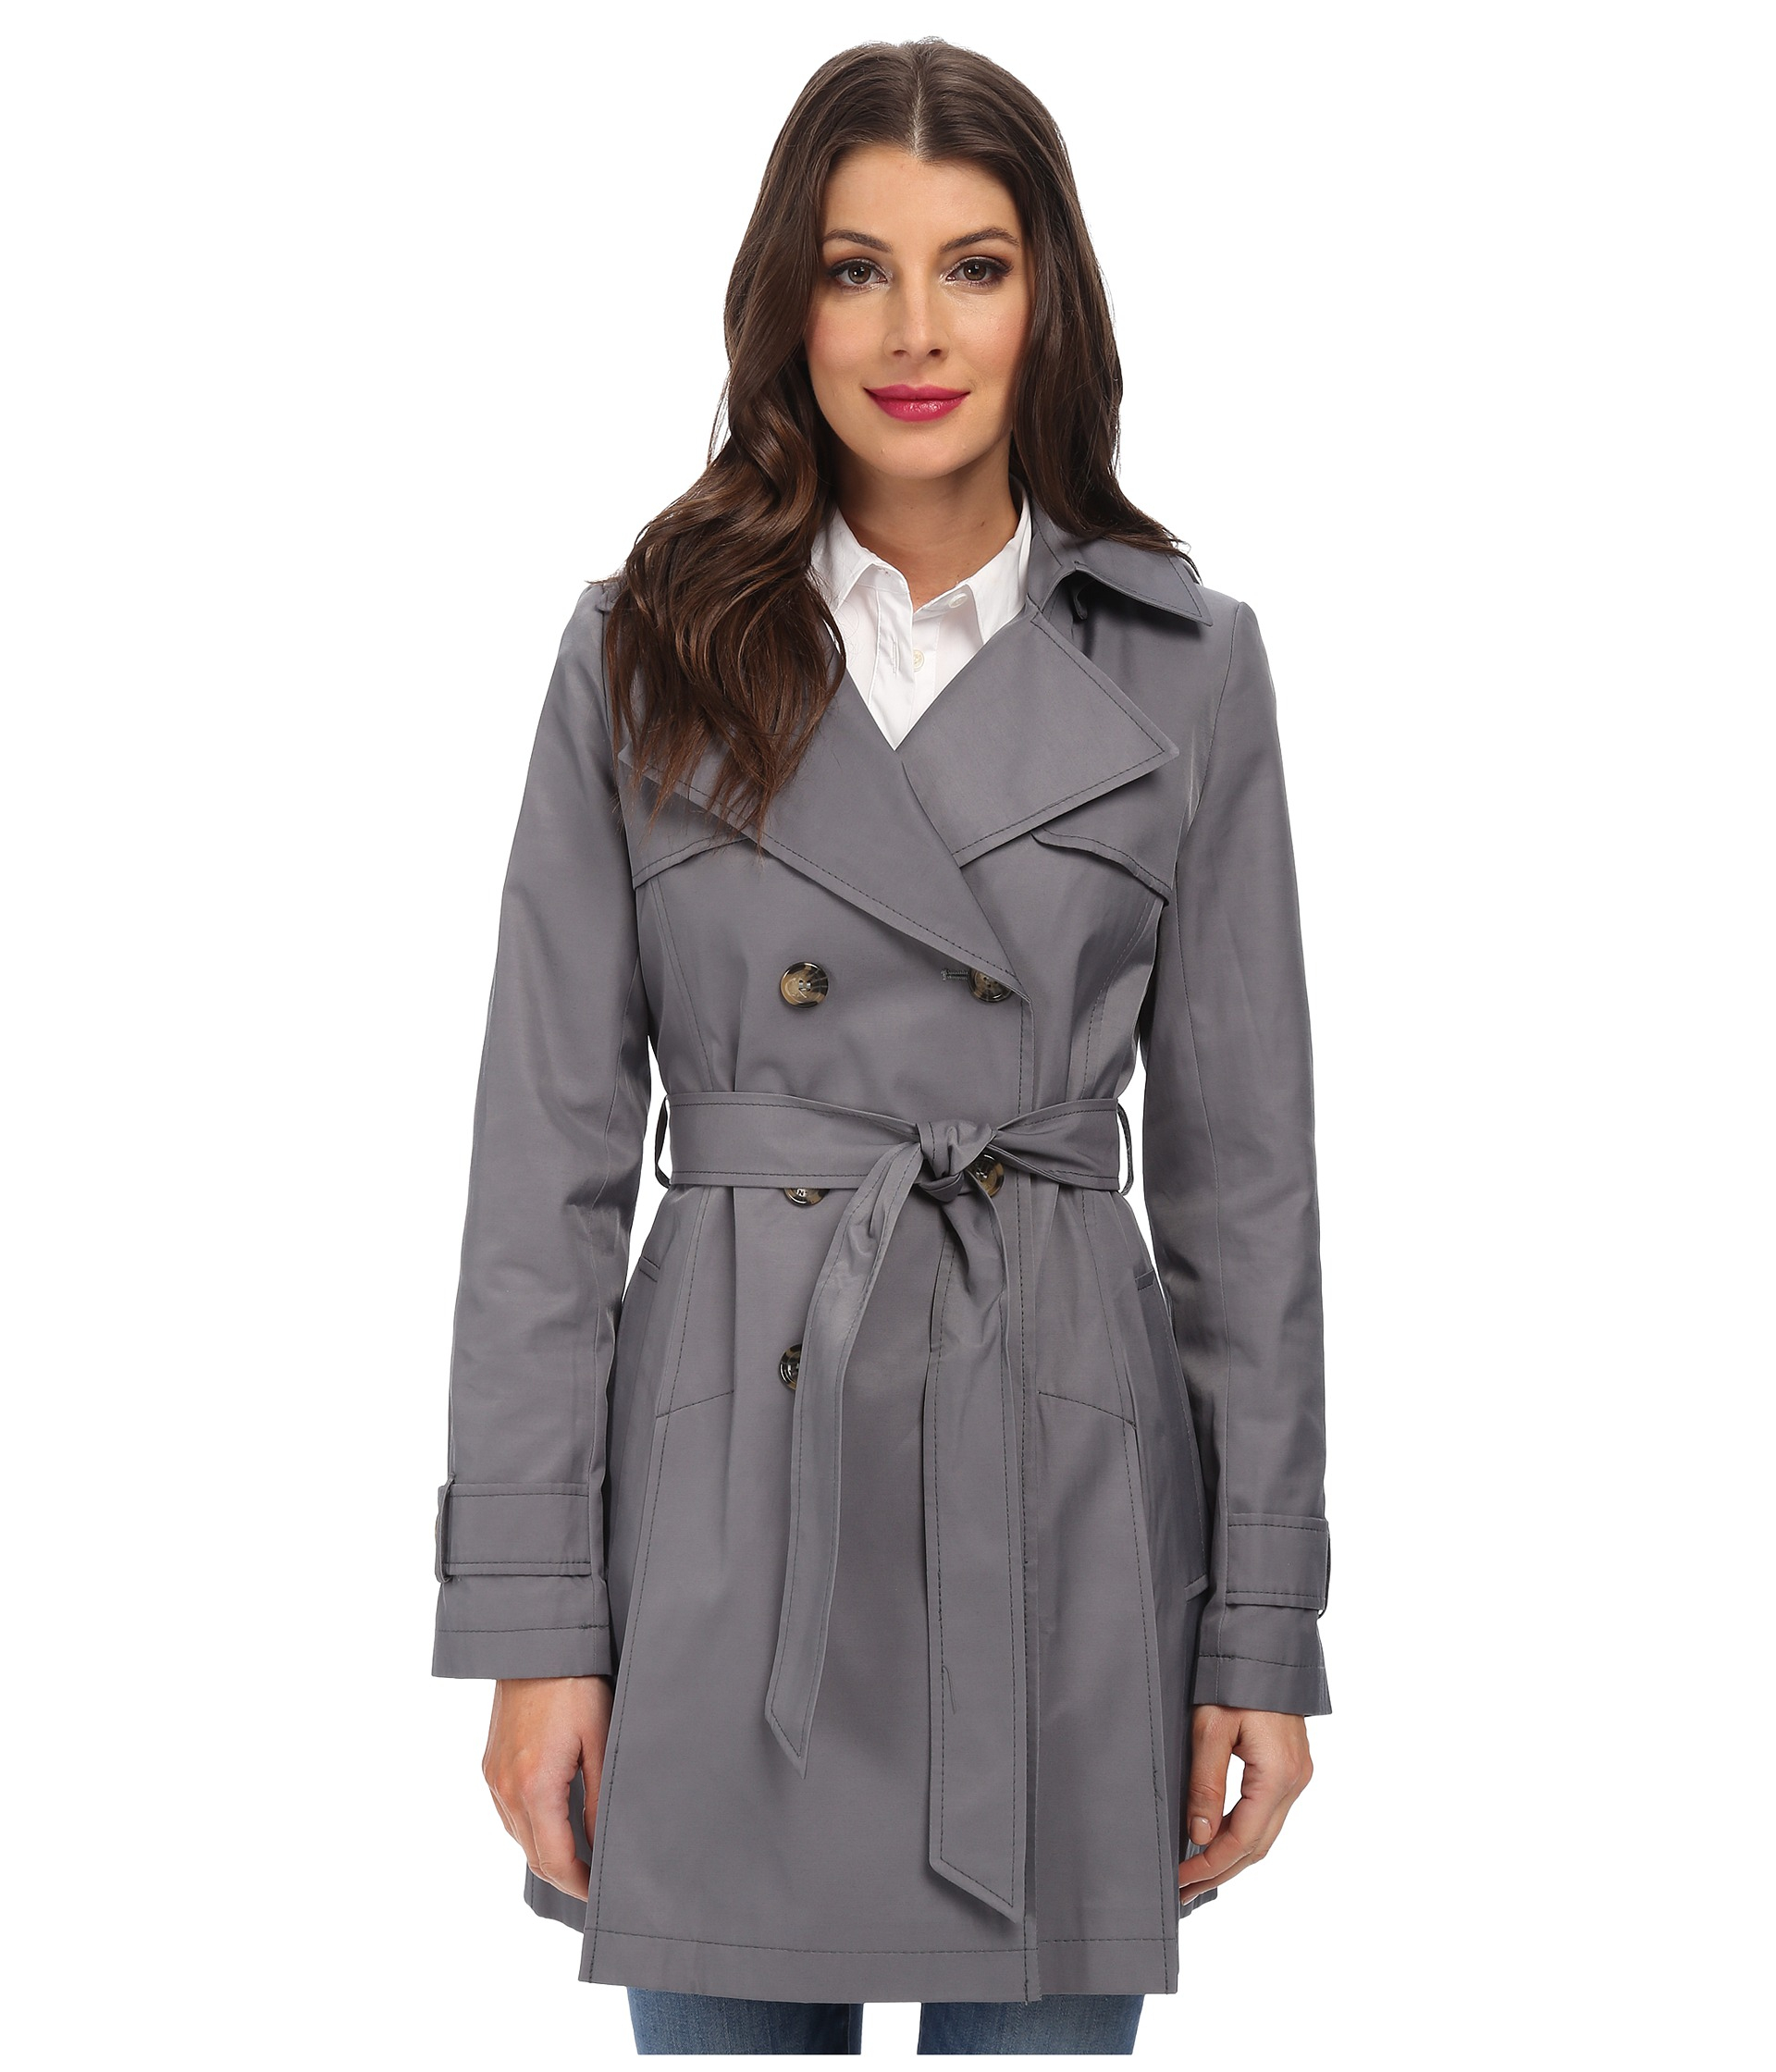 Lyst - Dkny Double-breasted Short Hooded Trench Coat in Gray